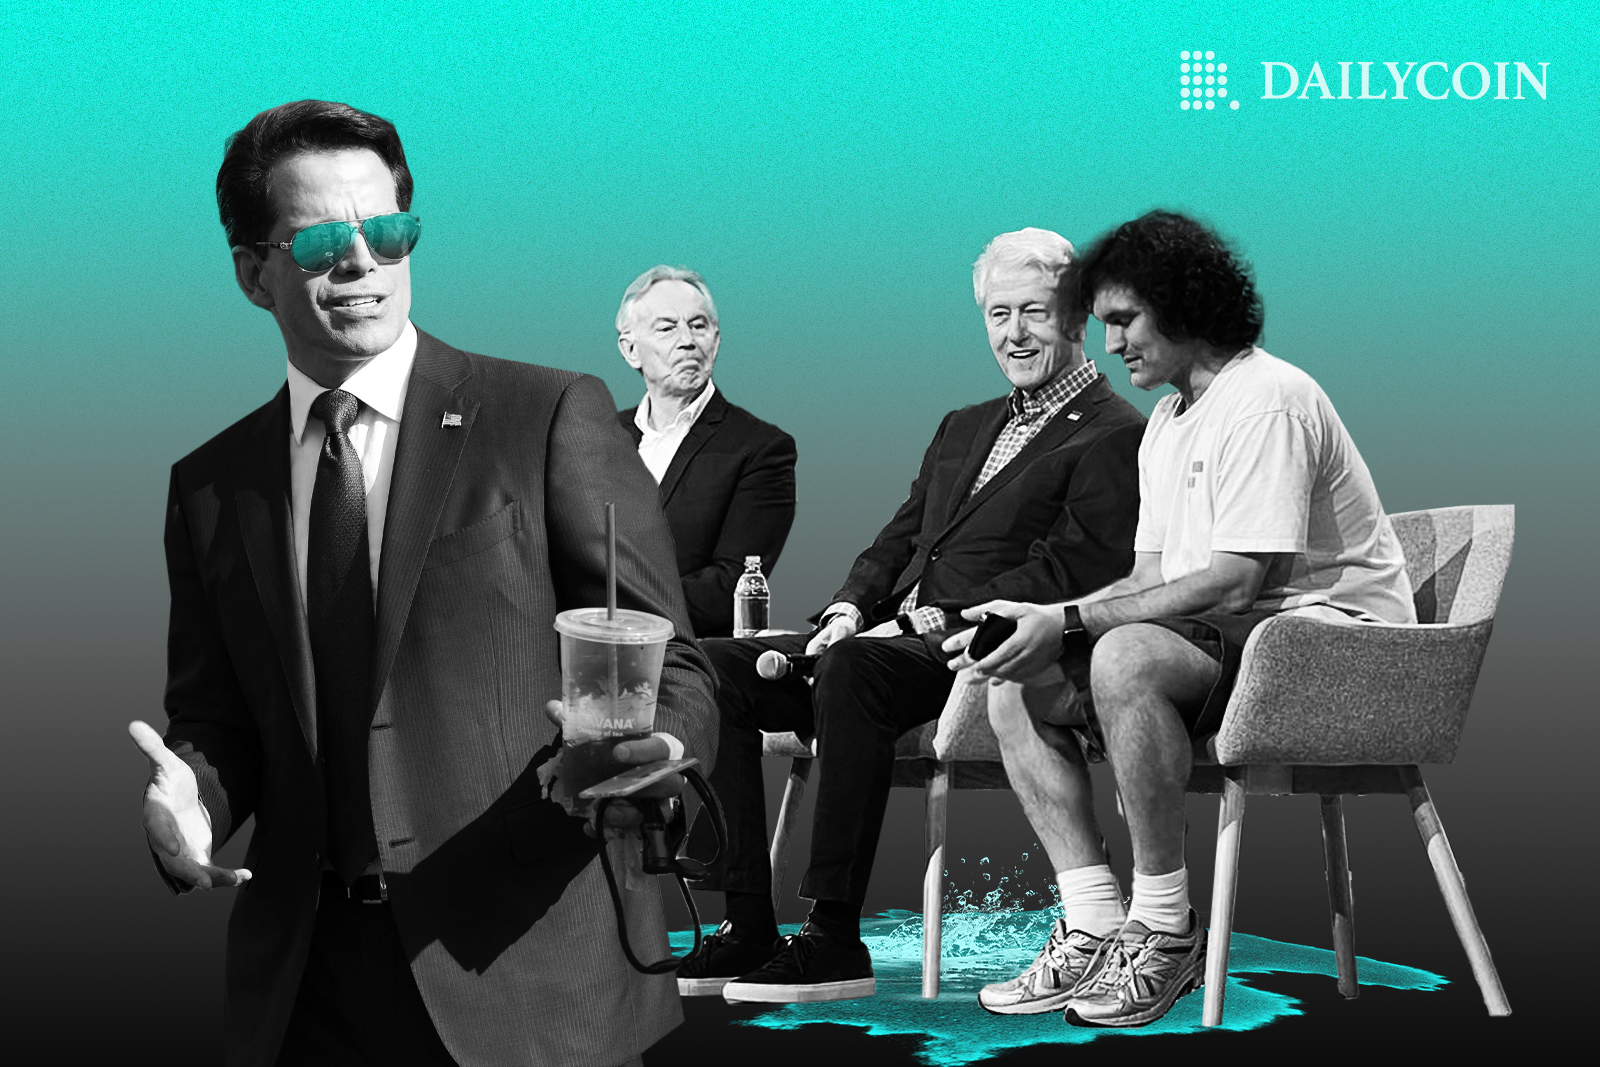 Anthony Scaramucci with sunglasses holding a drink with Sam Bankman-Fried, Bill Clinton and Tony Blair talking in the background at the Crypto Bahamas exclusive event.